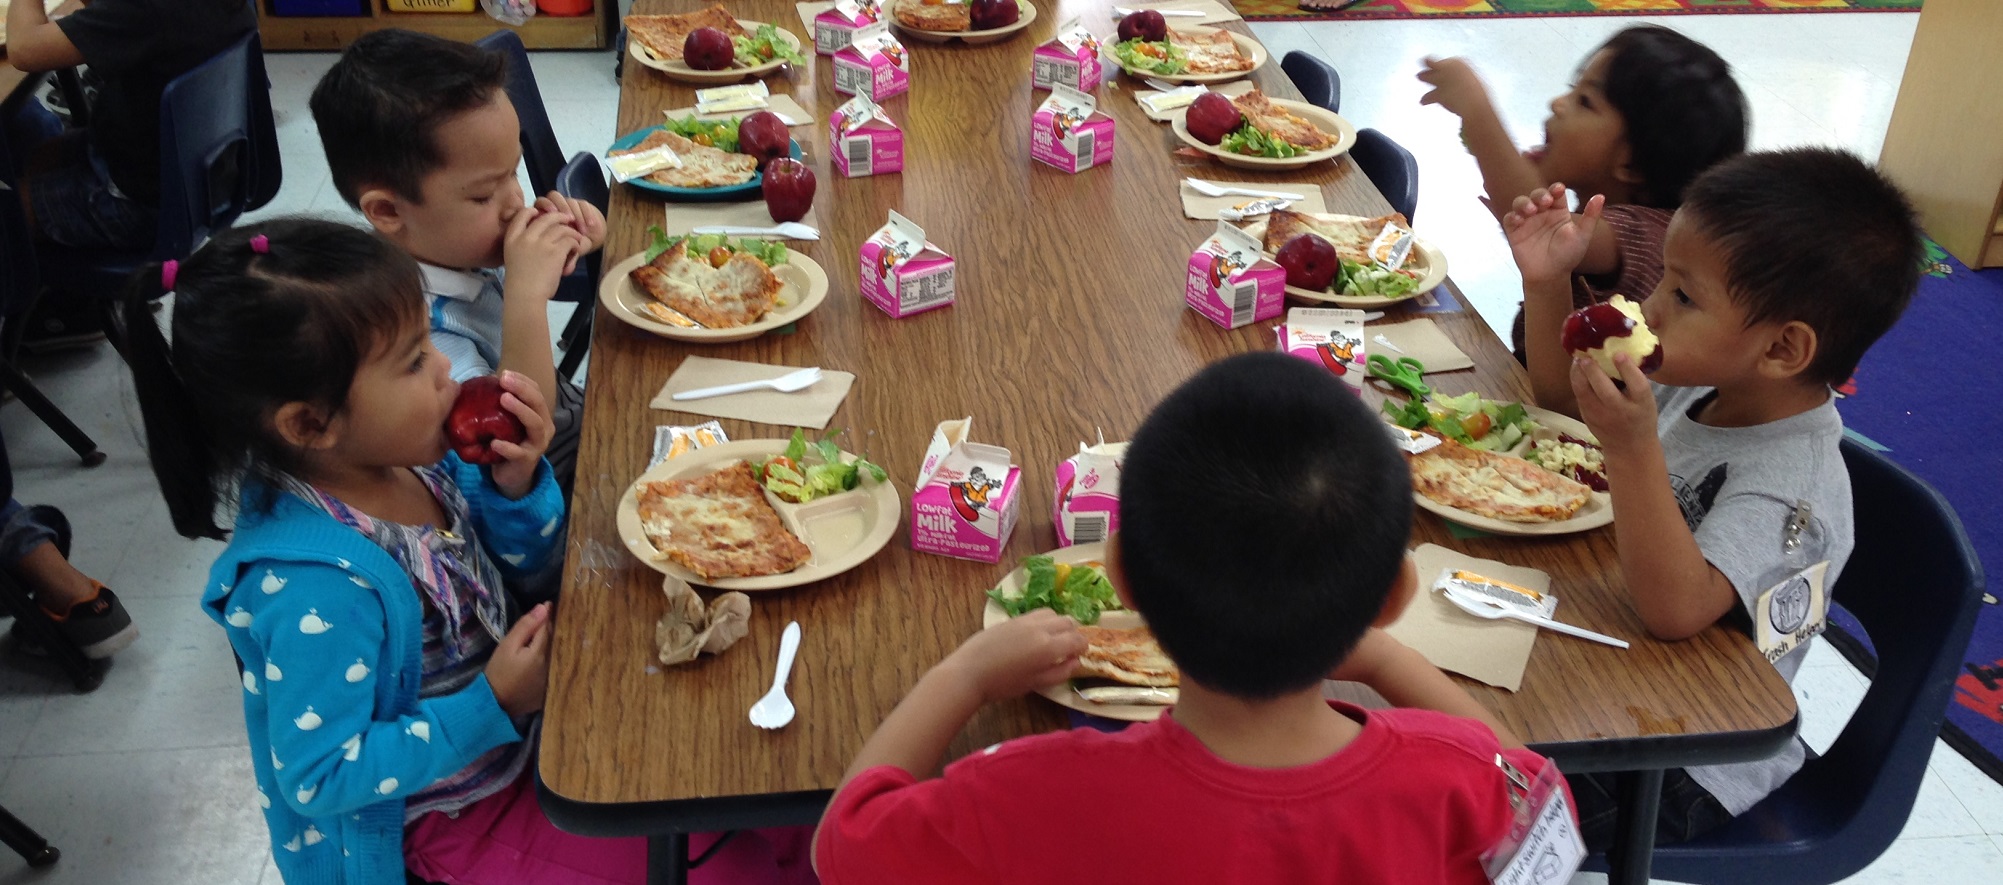 Kids eating lunch together in a cafeteria. 